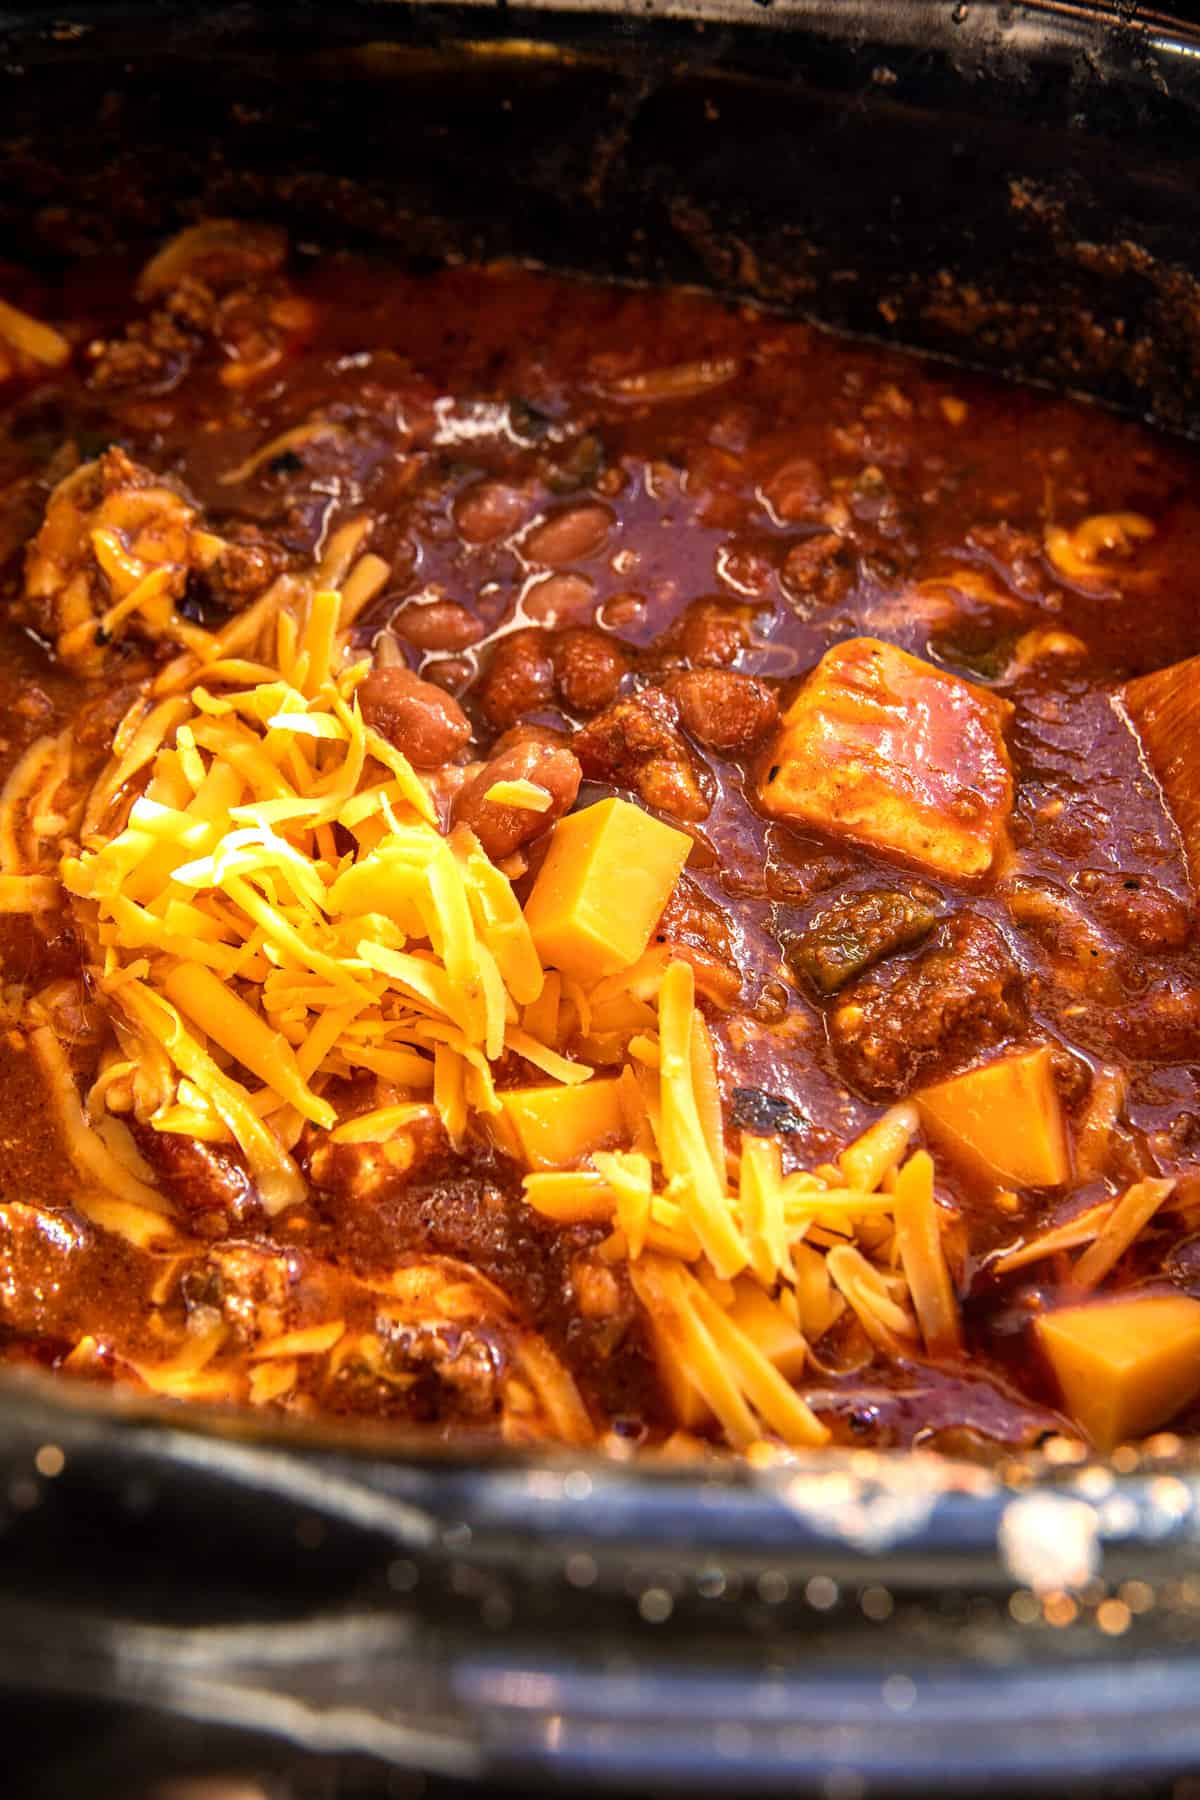 Crockpot Spicy Queso Beef Chili | halfbakedharvest.com